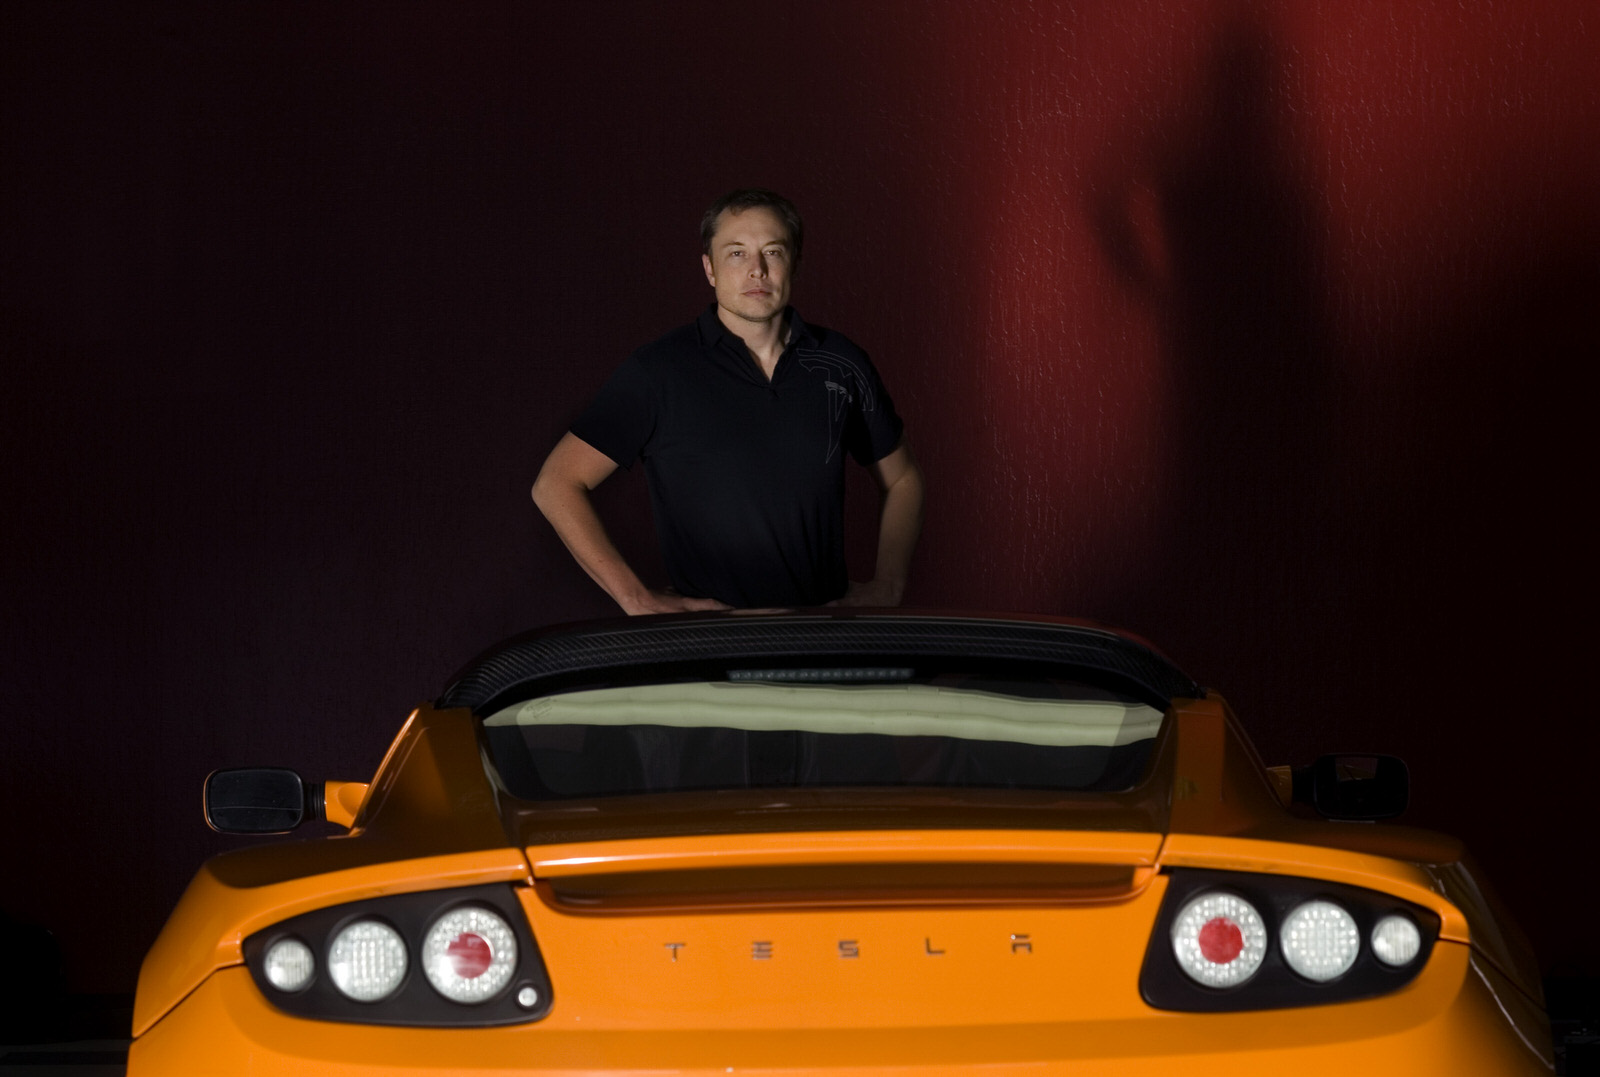 Musk gets the first Roadster